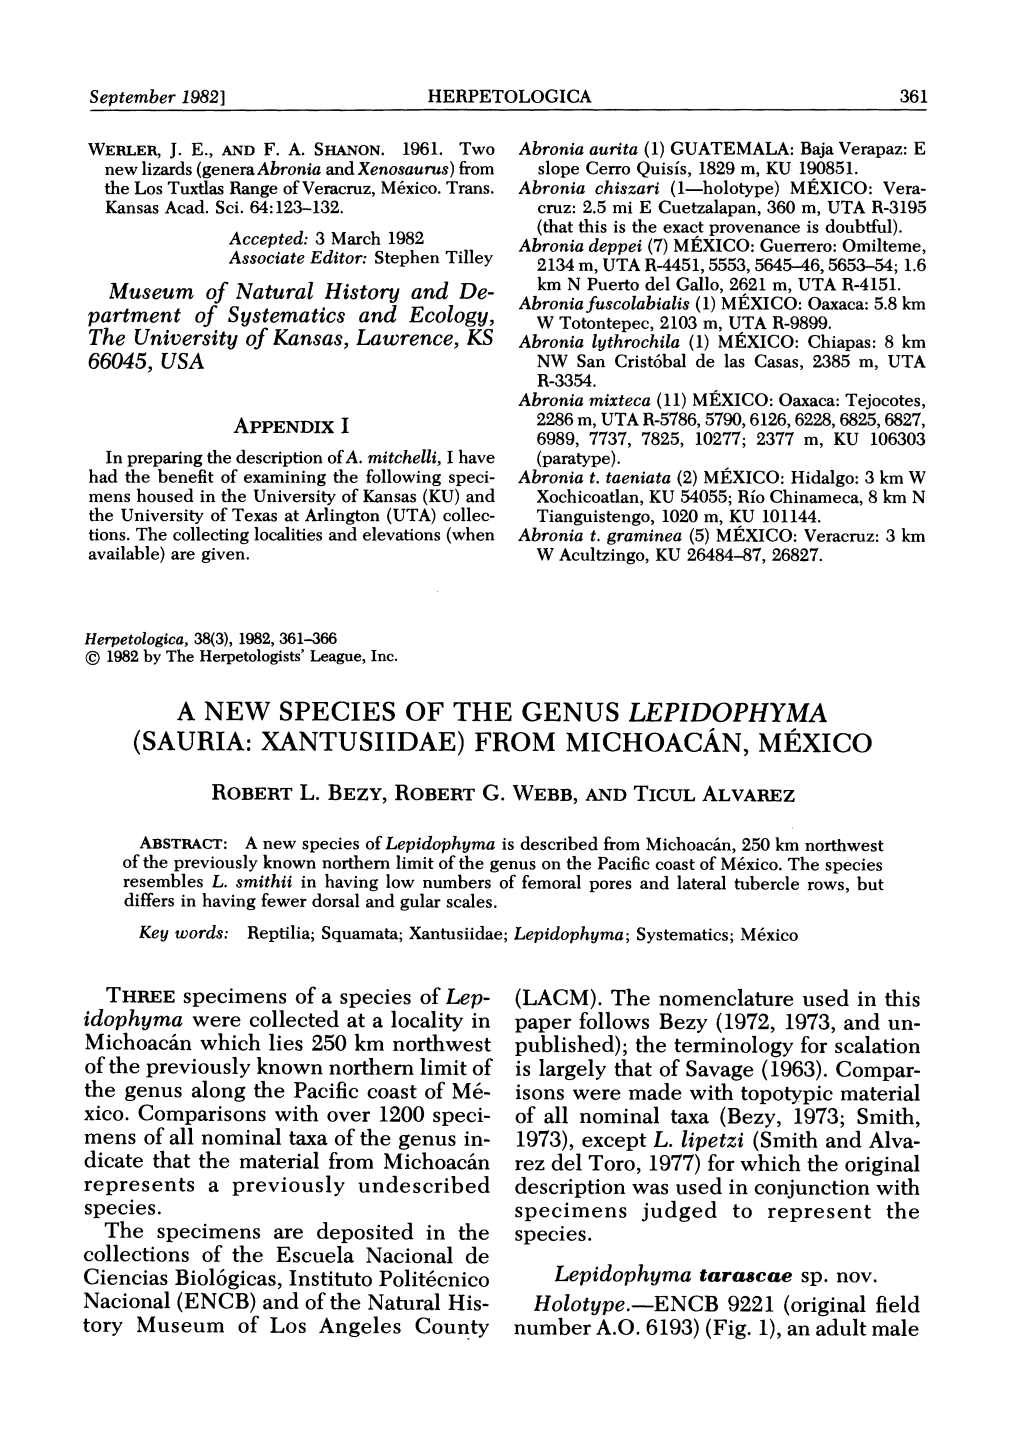 A New Species of the Genus Lepidophyma (Sauria: Xantusiidae) from Michoacan, Mexico